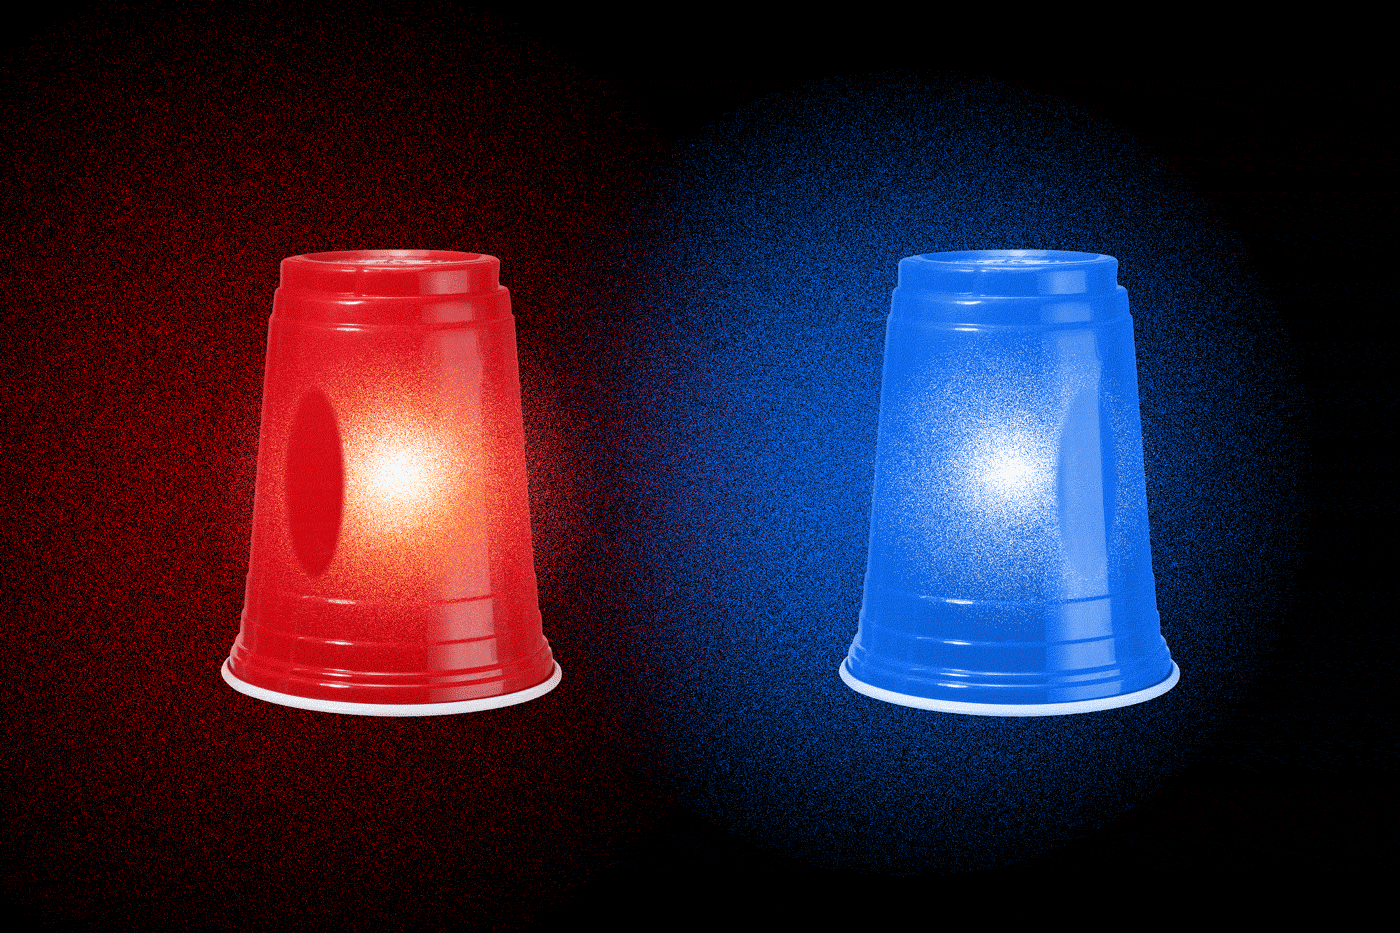 An animated illustration of two upside-down red and blue plastic cups as flashing police lights.